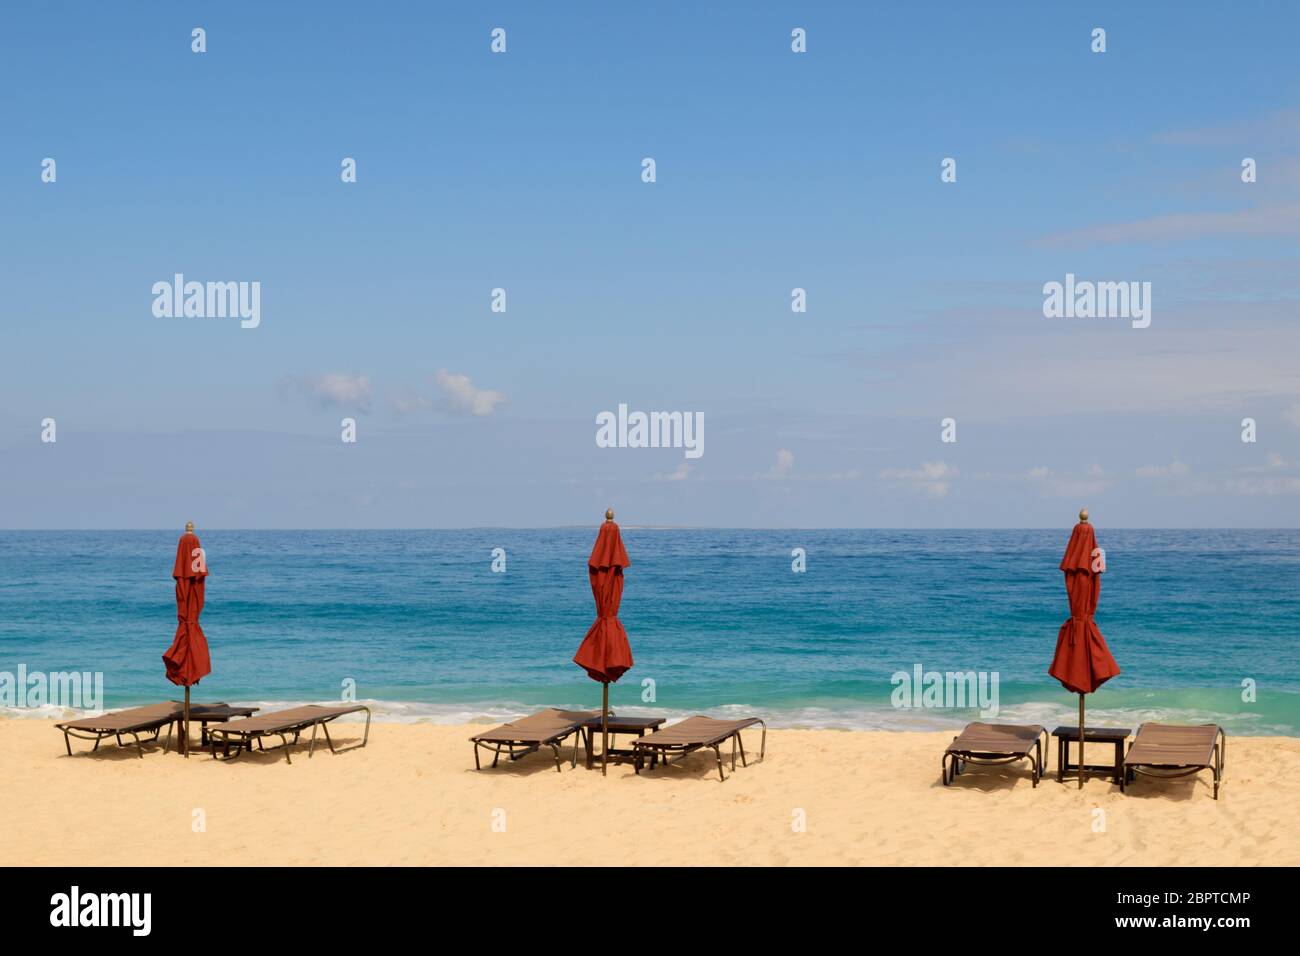 Red beach umbrellas on a beautiful day in Anguilla Stock Photo